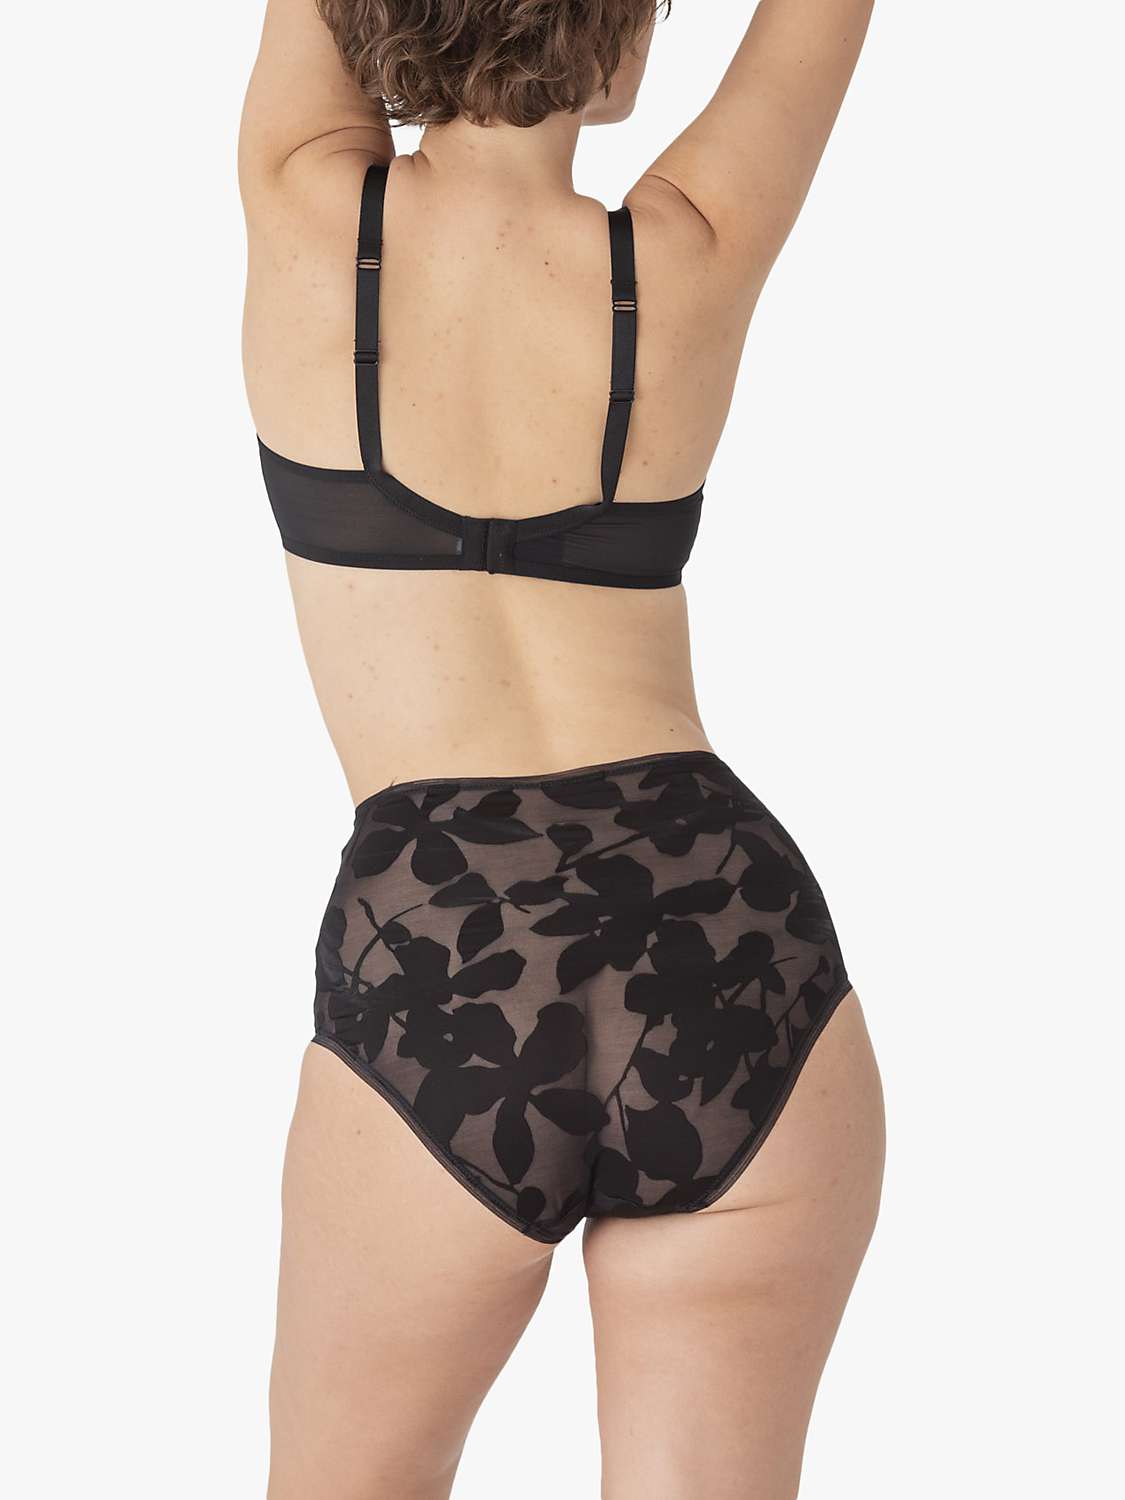 Buy Maison Lejaby Ombrage Full Cup Underwired Bra Online at johnlewis.com